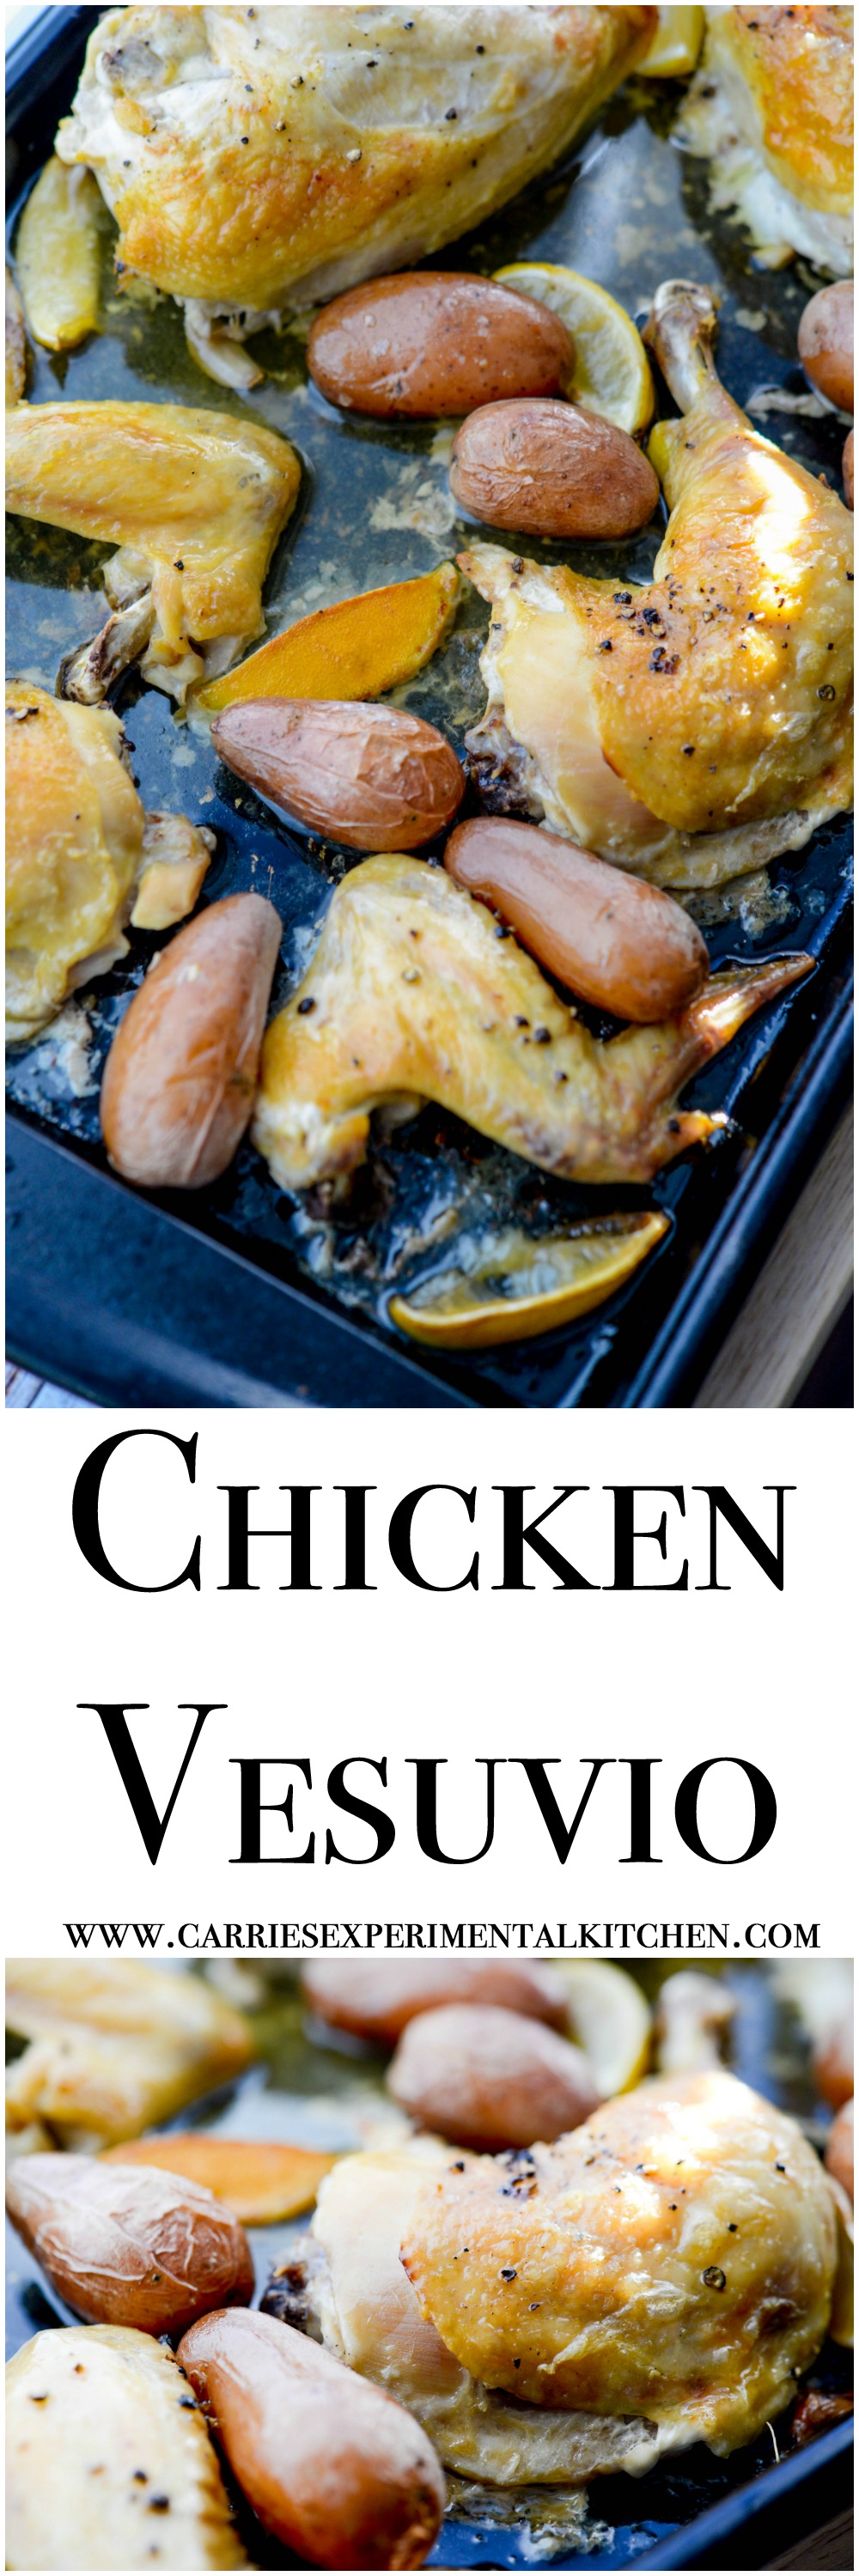 Chicken Vesuvio - This easy sheet pan dinner is made with chicken, garlic, lemon, and potatoes. The recipe was created by Ann at Sumptuous Spoonfuls as part of a guest post on basilmomma.com